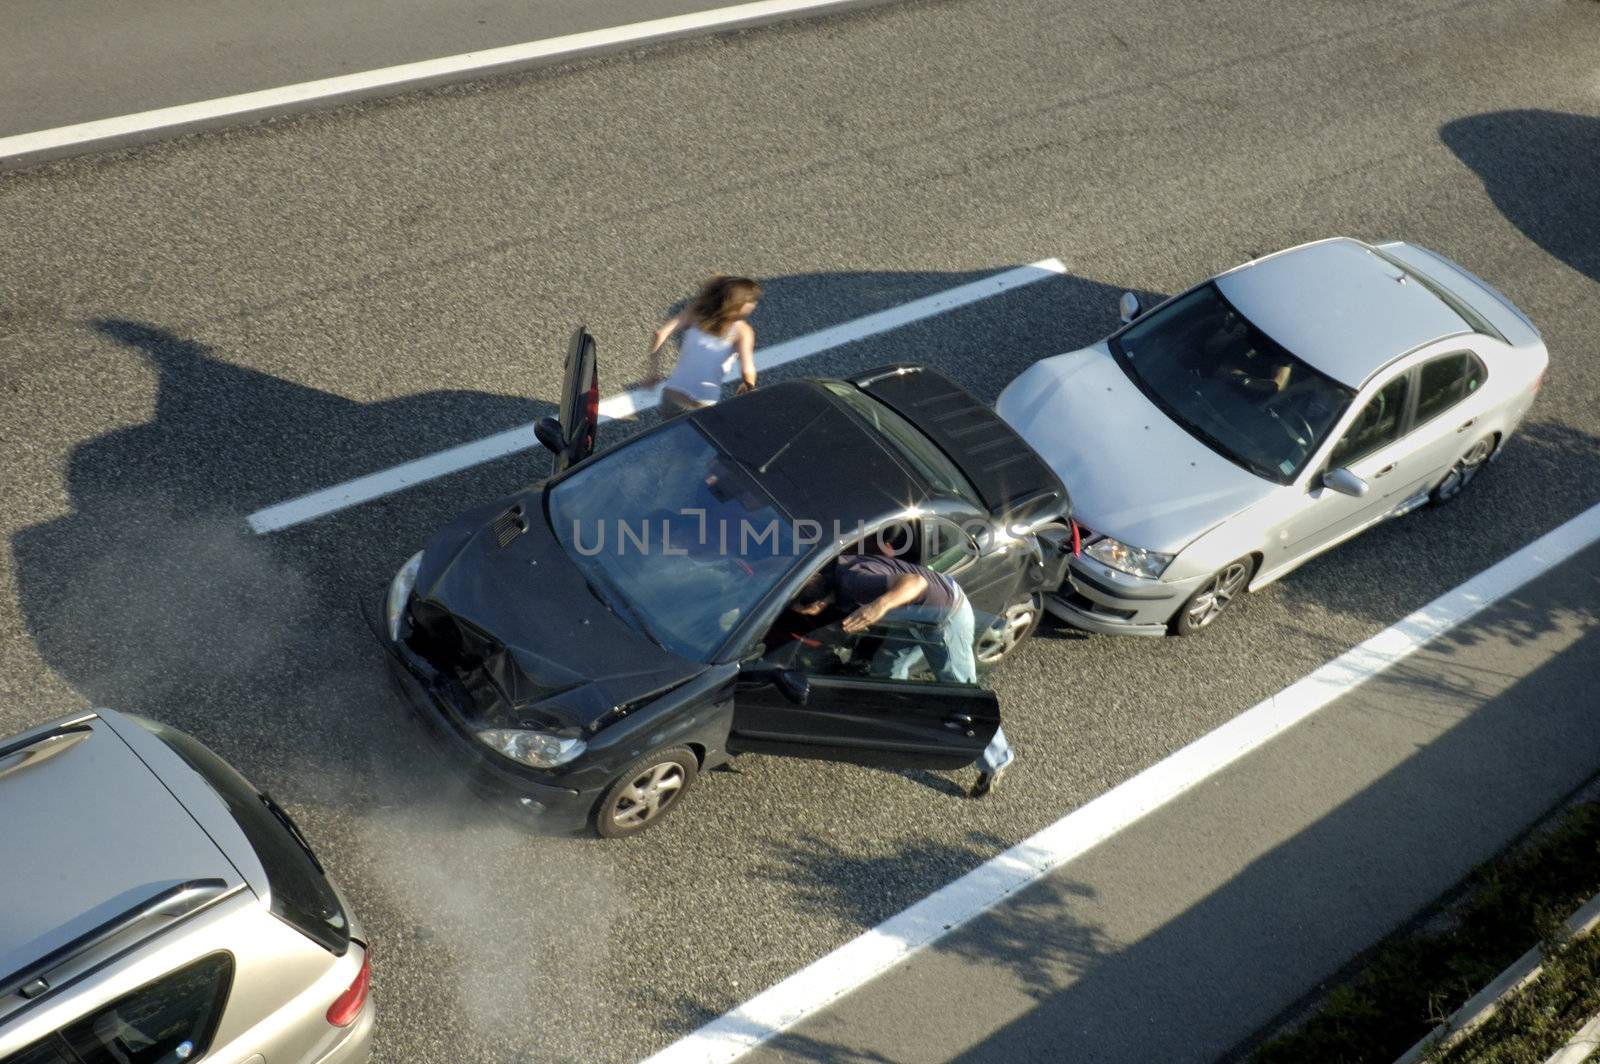 A small shunt on the freeway (motorway, autoroute, autobahn) a few seconds after it happened. Steam can be seen coming from under the bonnet of the black car. Motion blur on the passenger fleeing in panic.